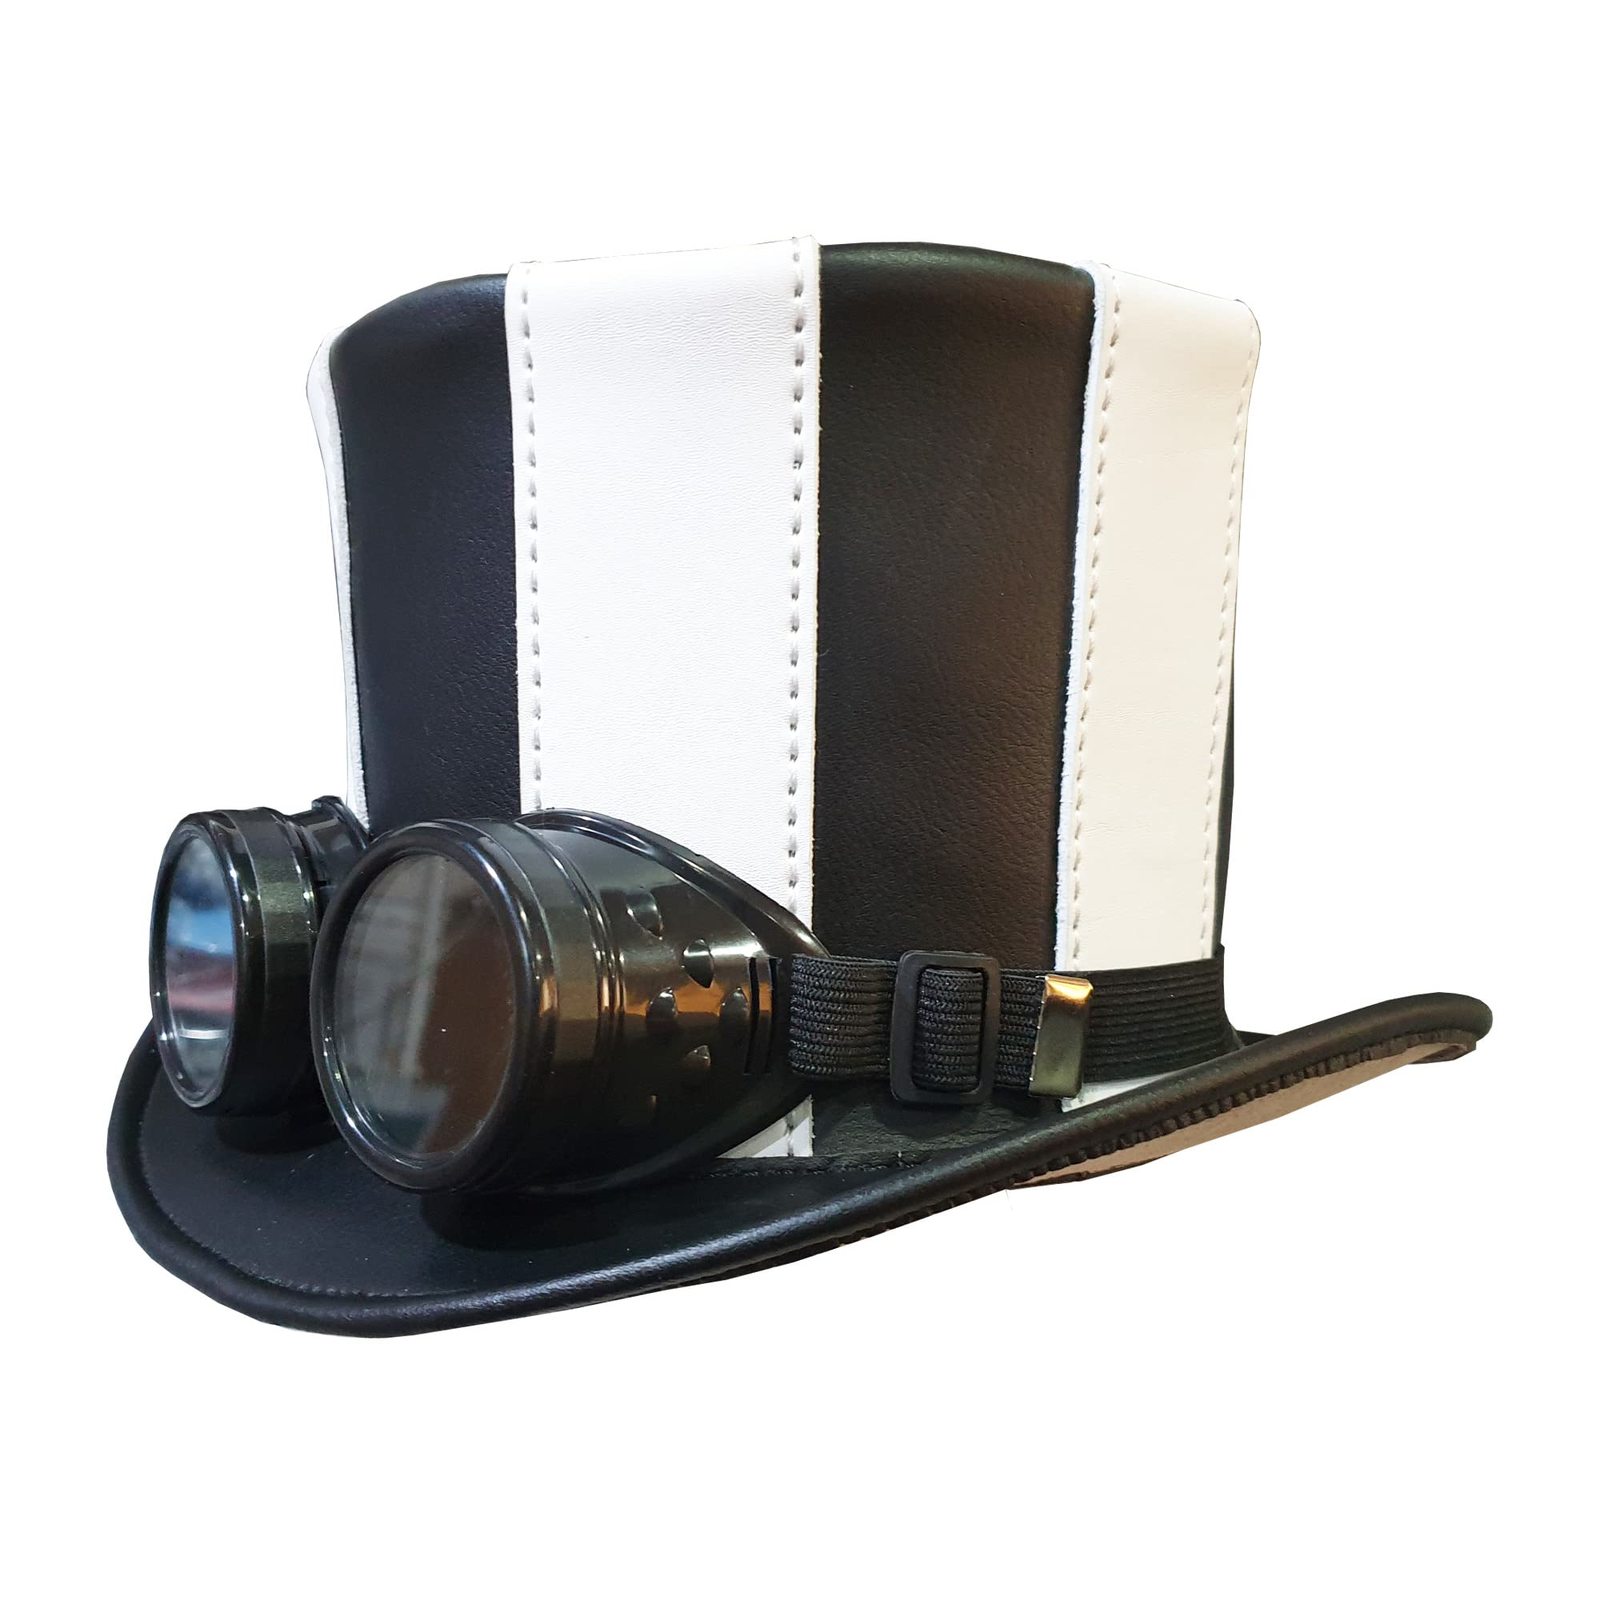 Primary image for Steampunk Gothic Striped Leather Top Hat